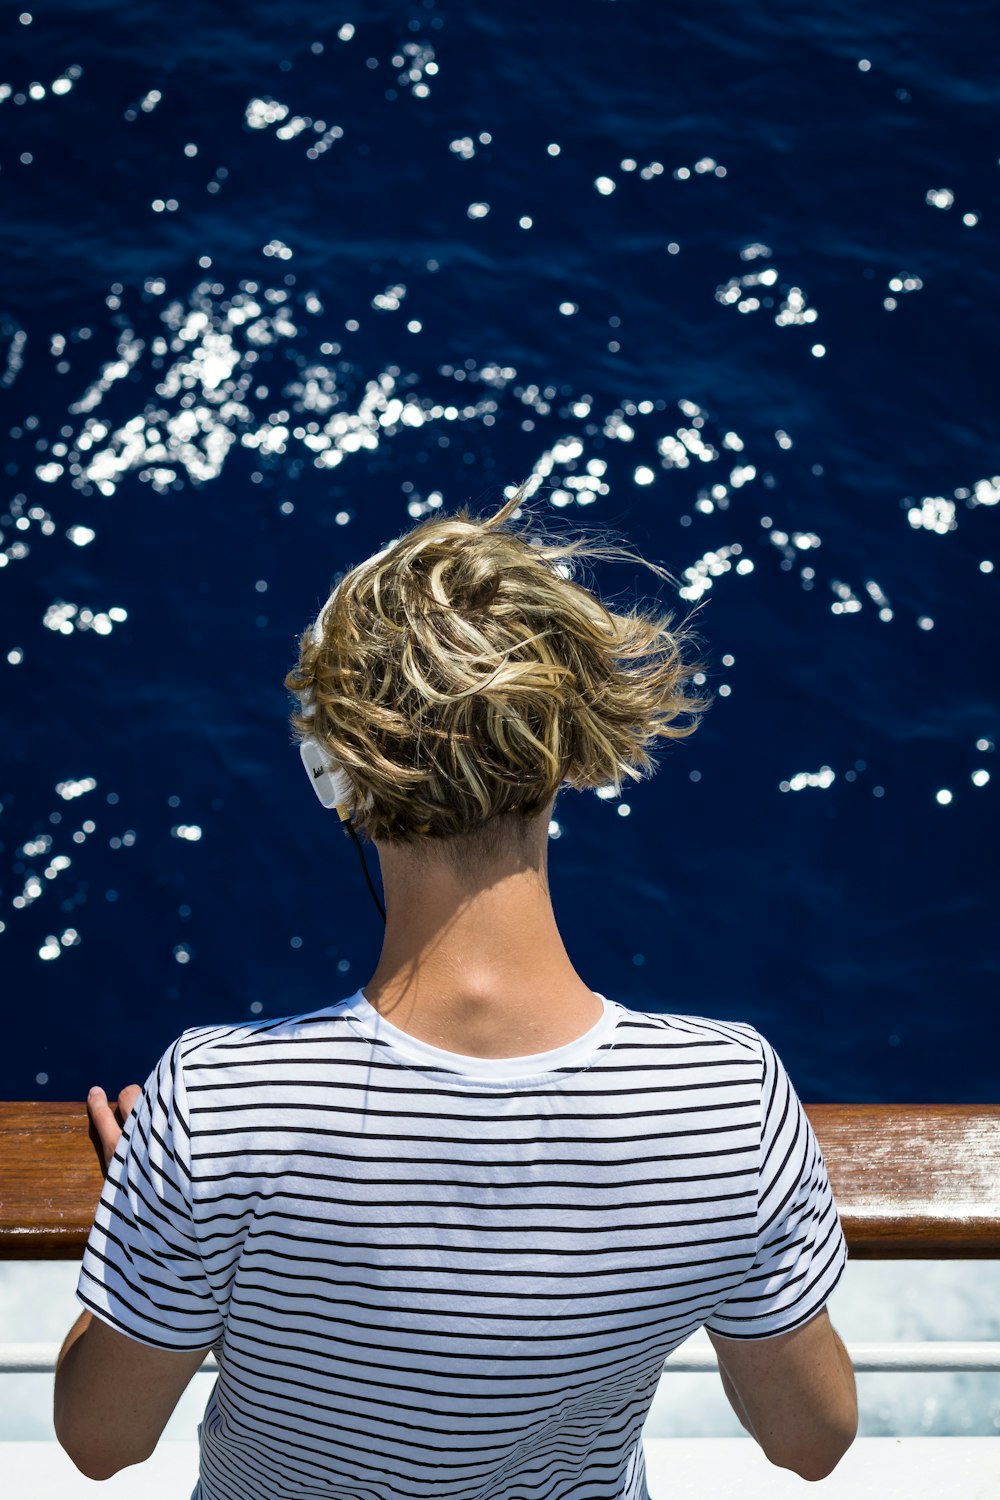 woman wearing white and black striped shirt looking at water